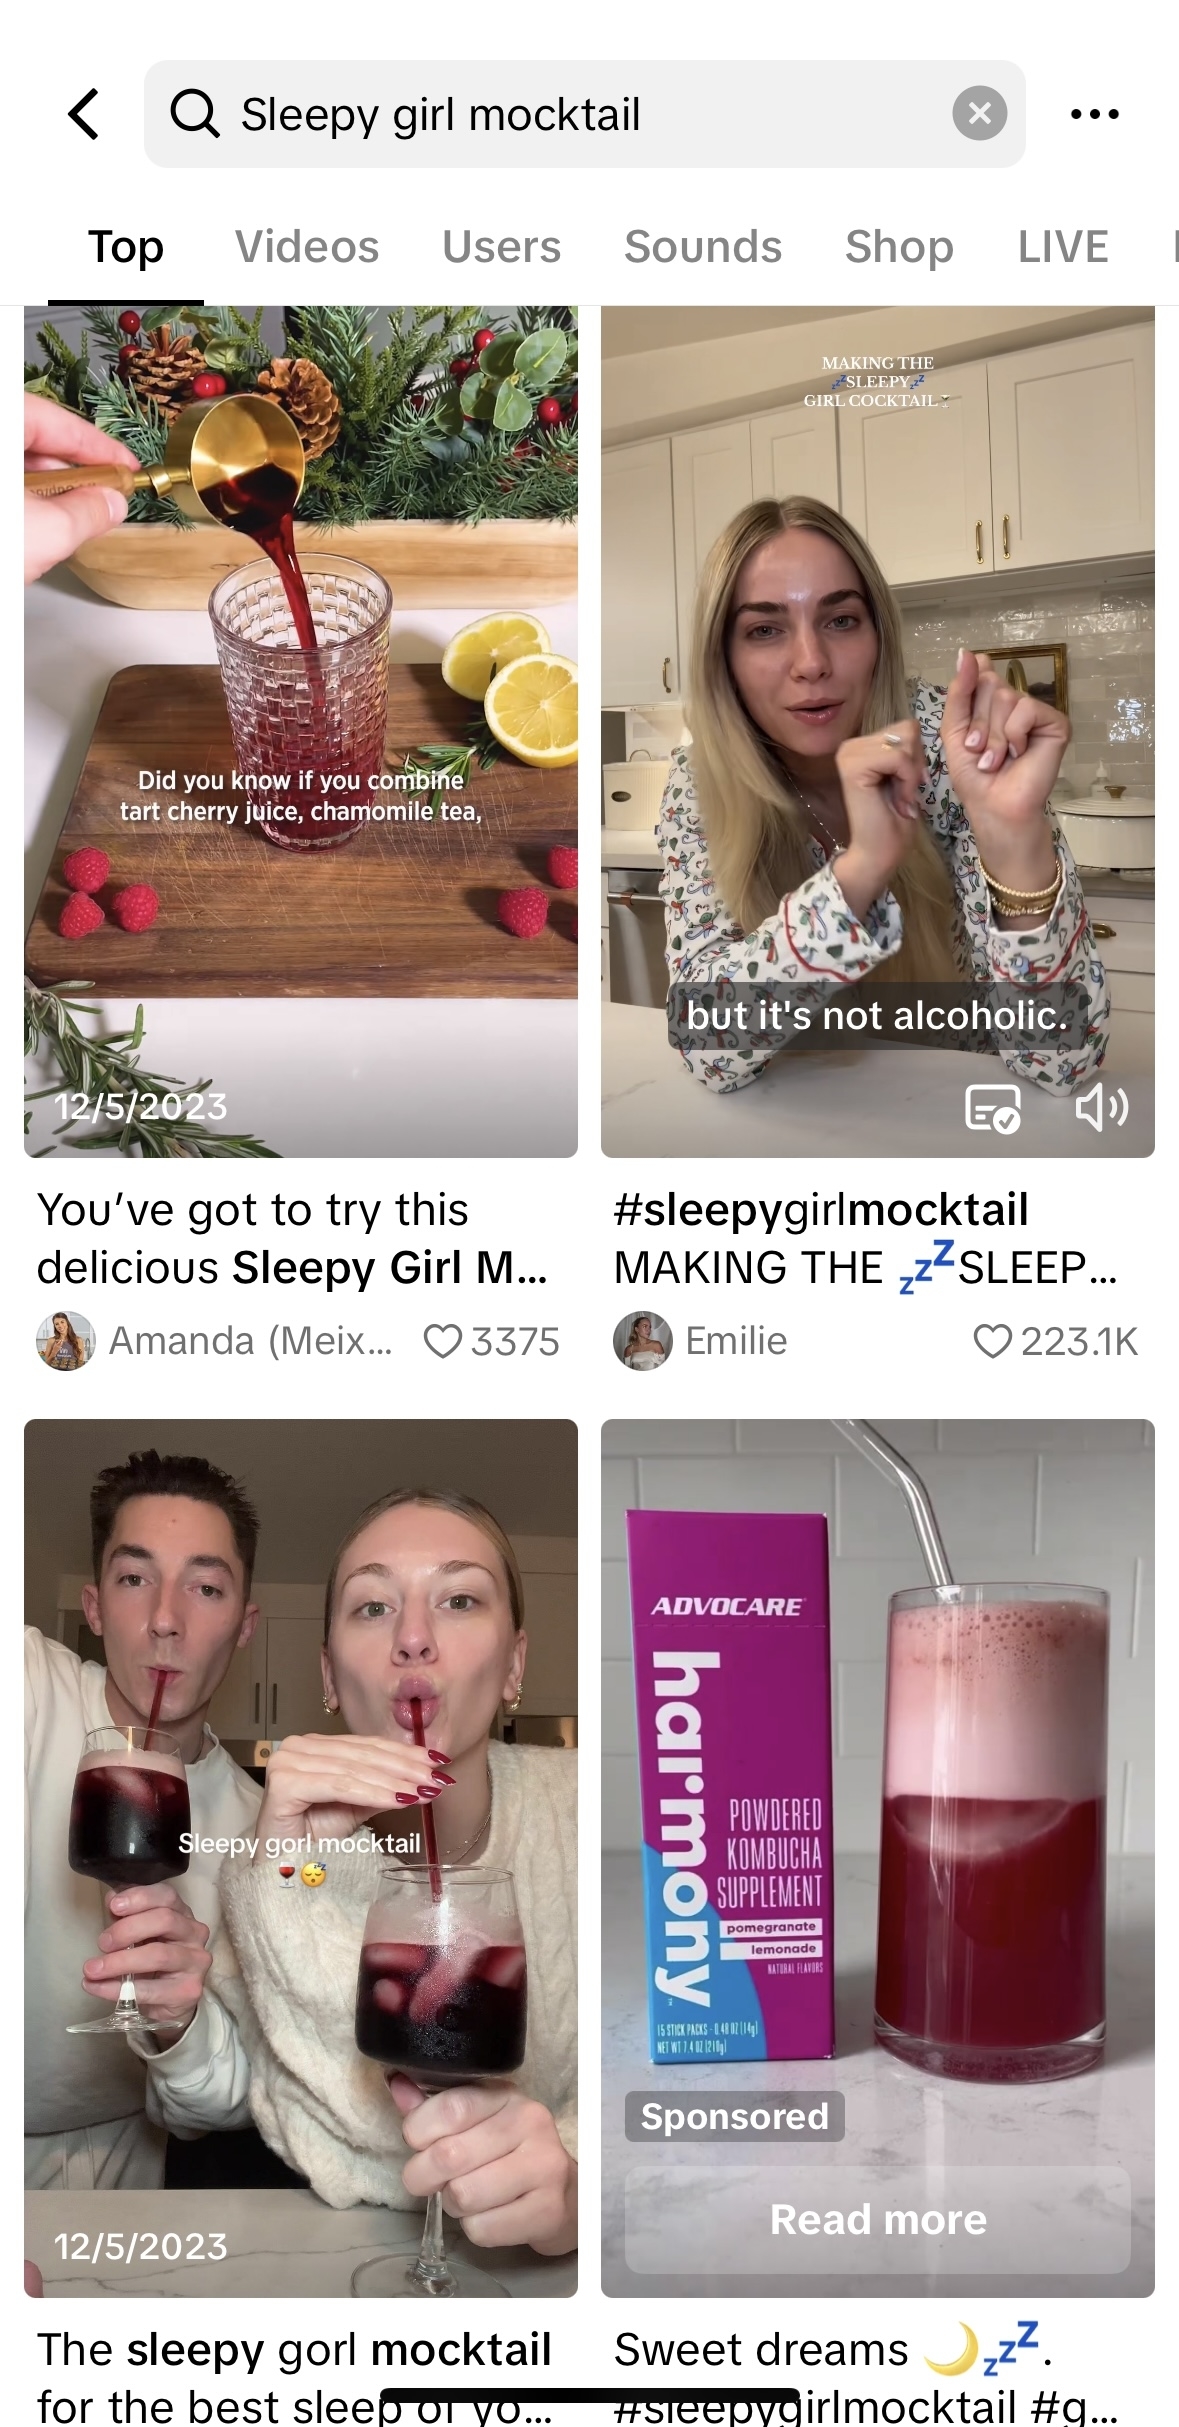 Collage of four images: three people holding drinks, and a text-based recipe for a &quot;Sleepy Girl&quot; cocktail